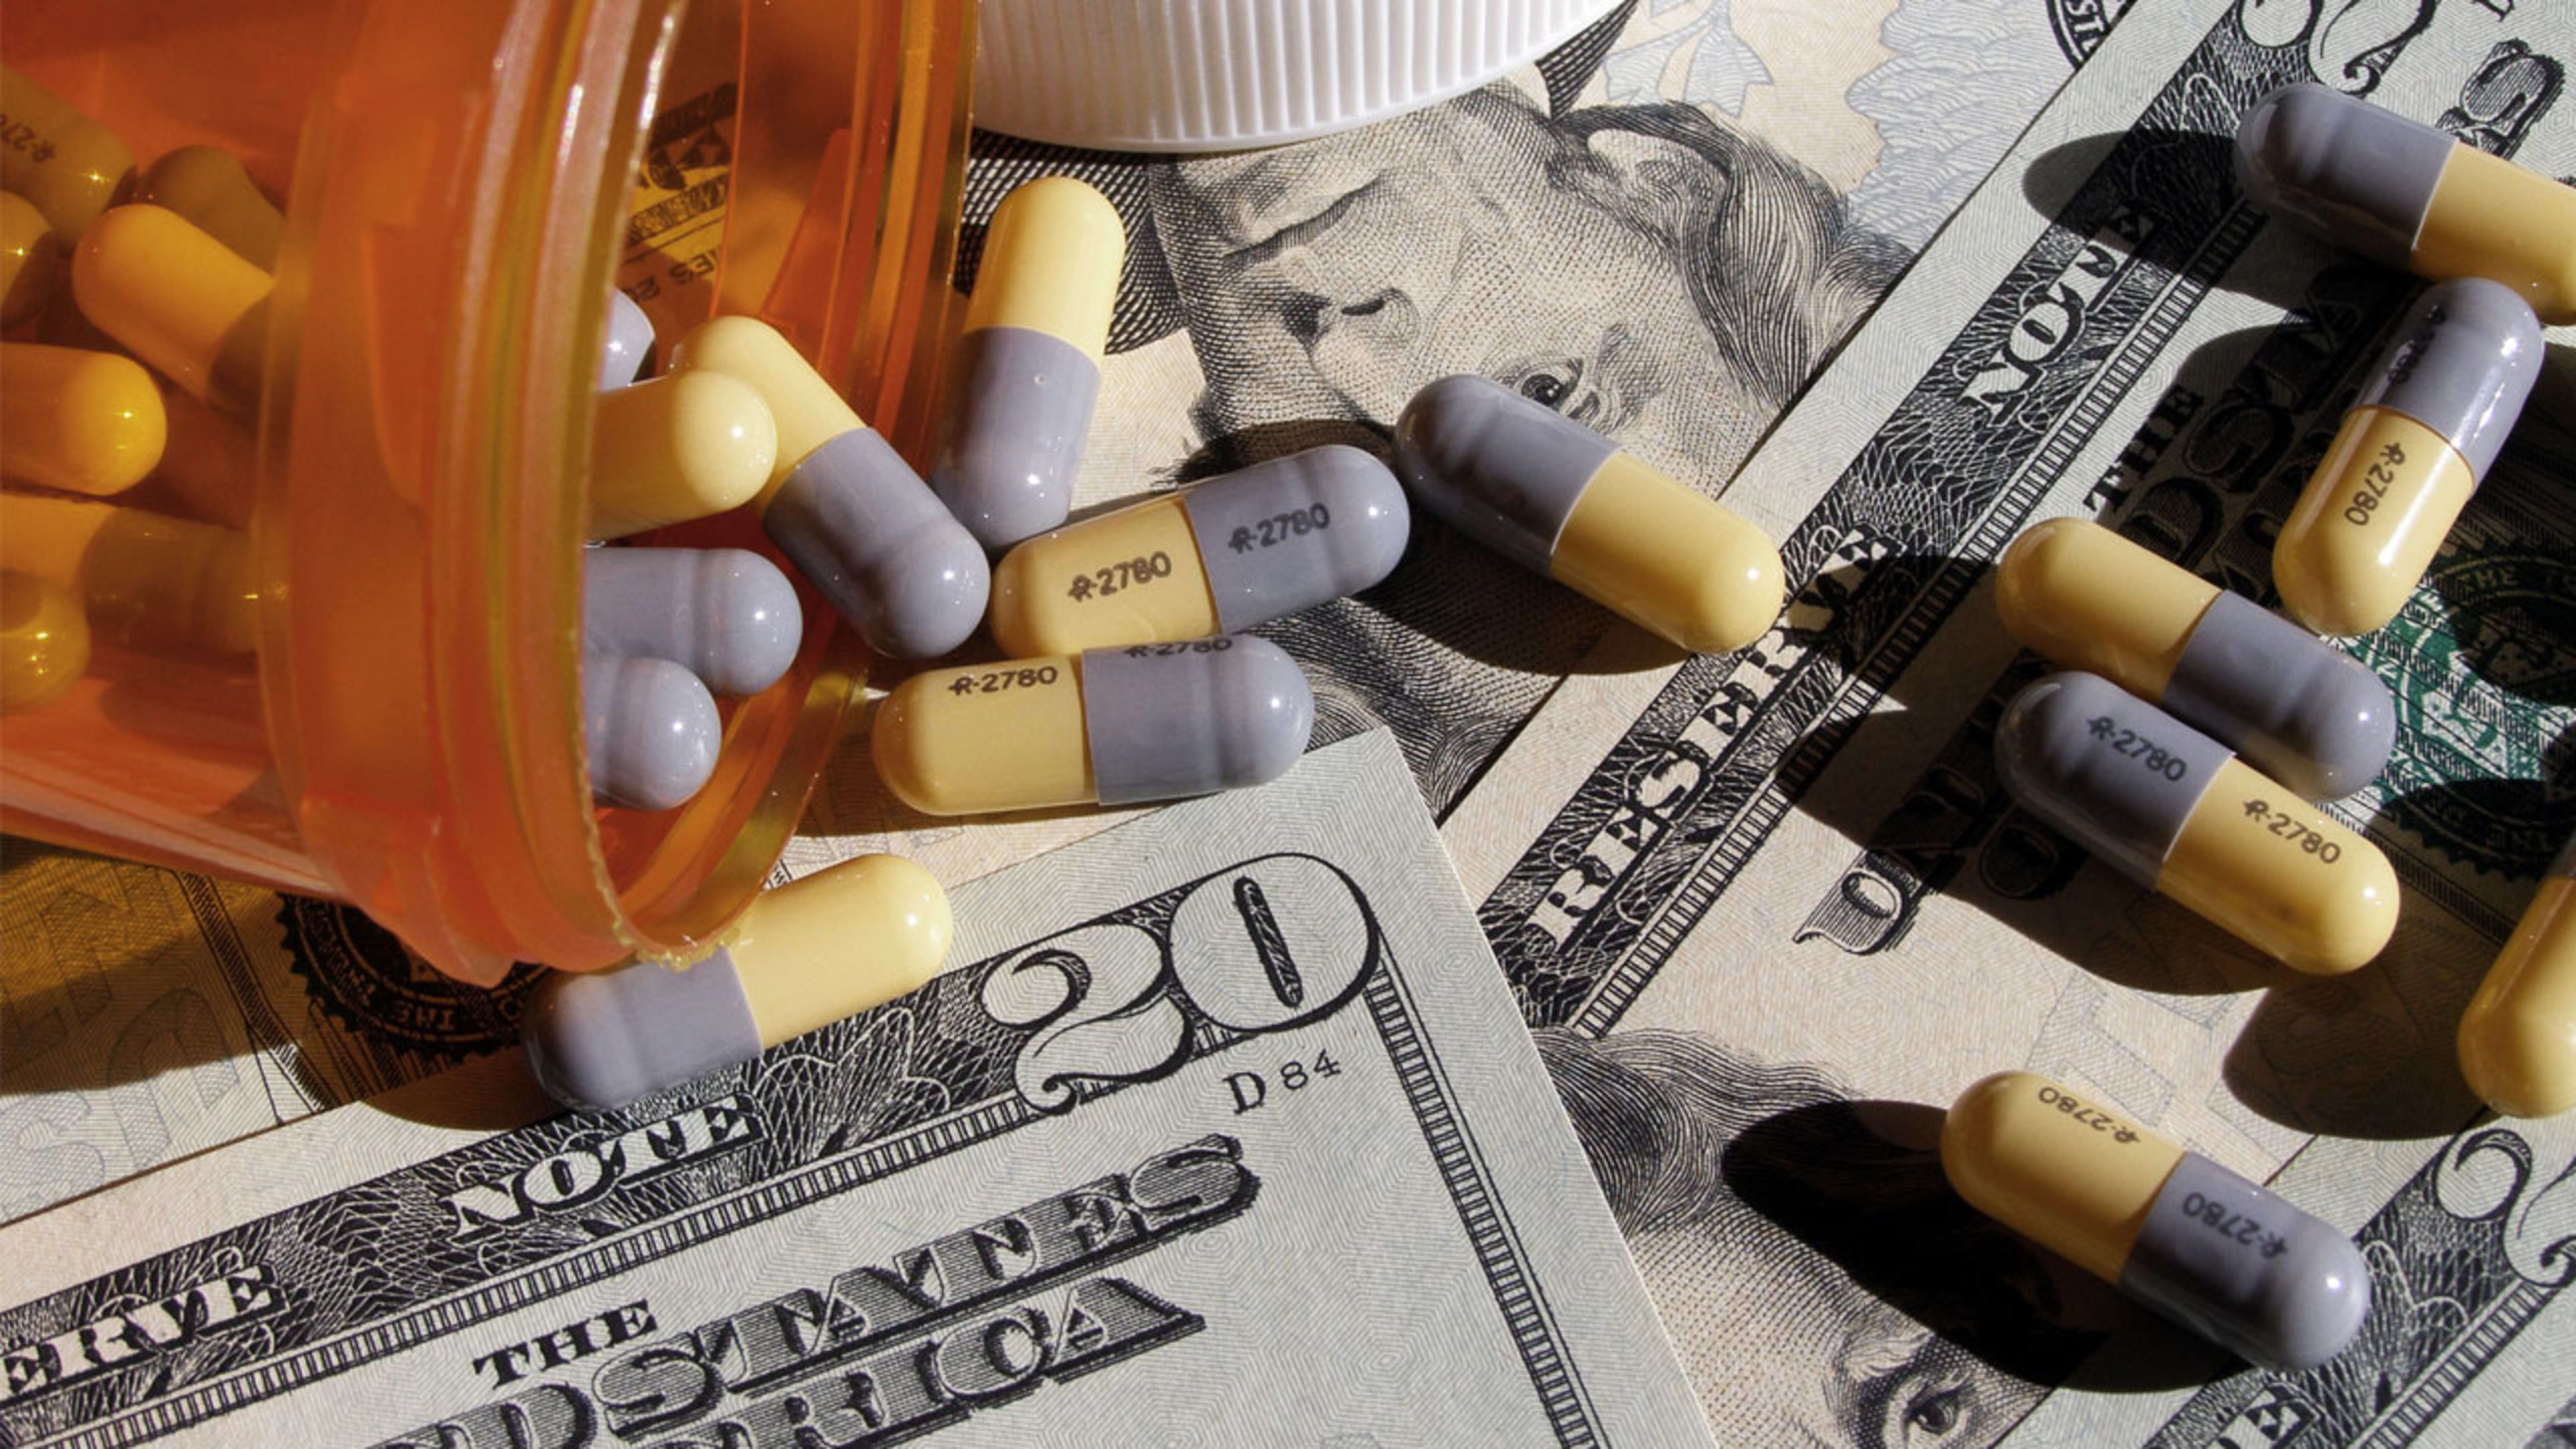 Pharma Executive Confronted Over Drug Price Hikes: How Do You Live With Yourself?